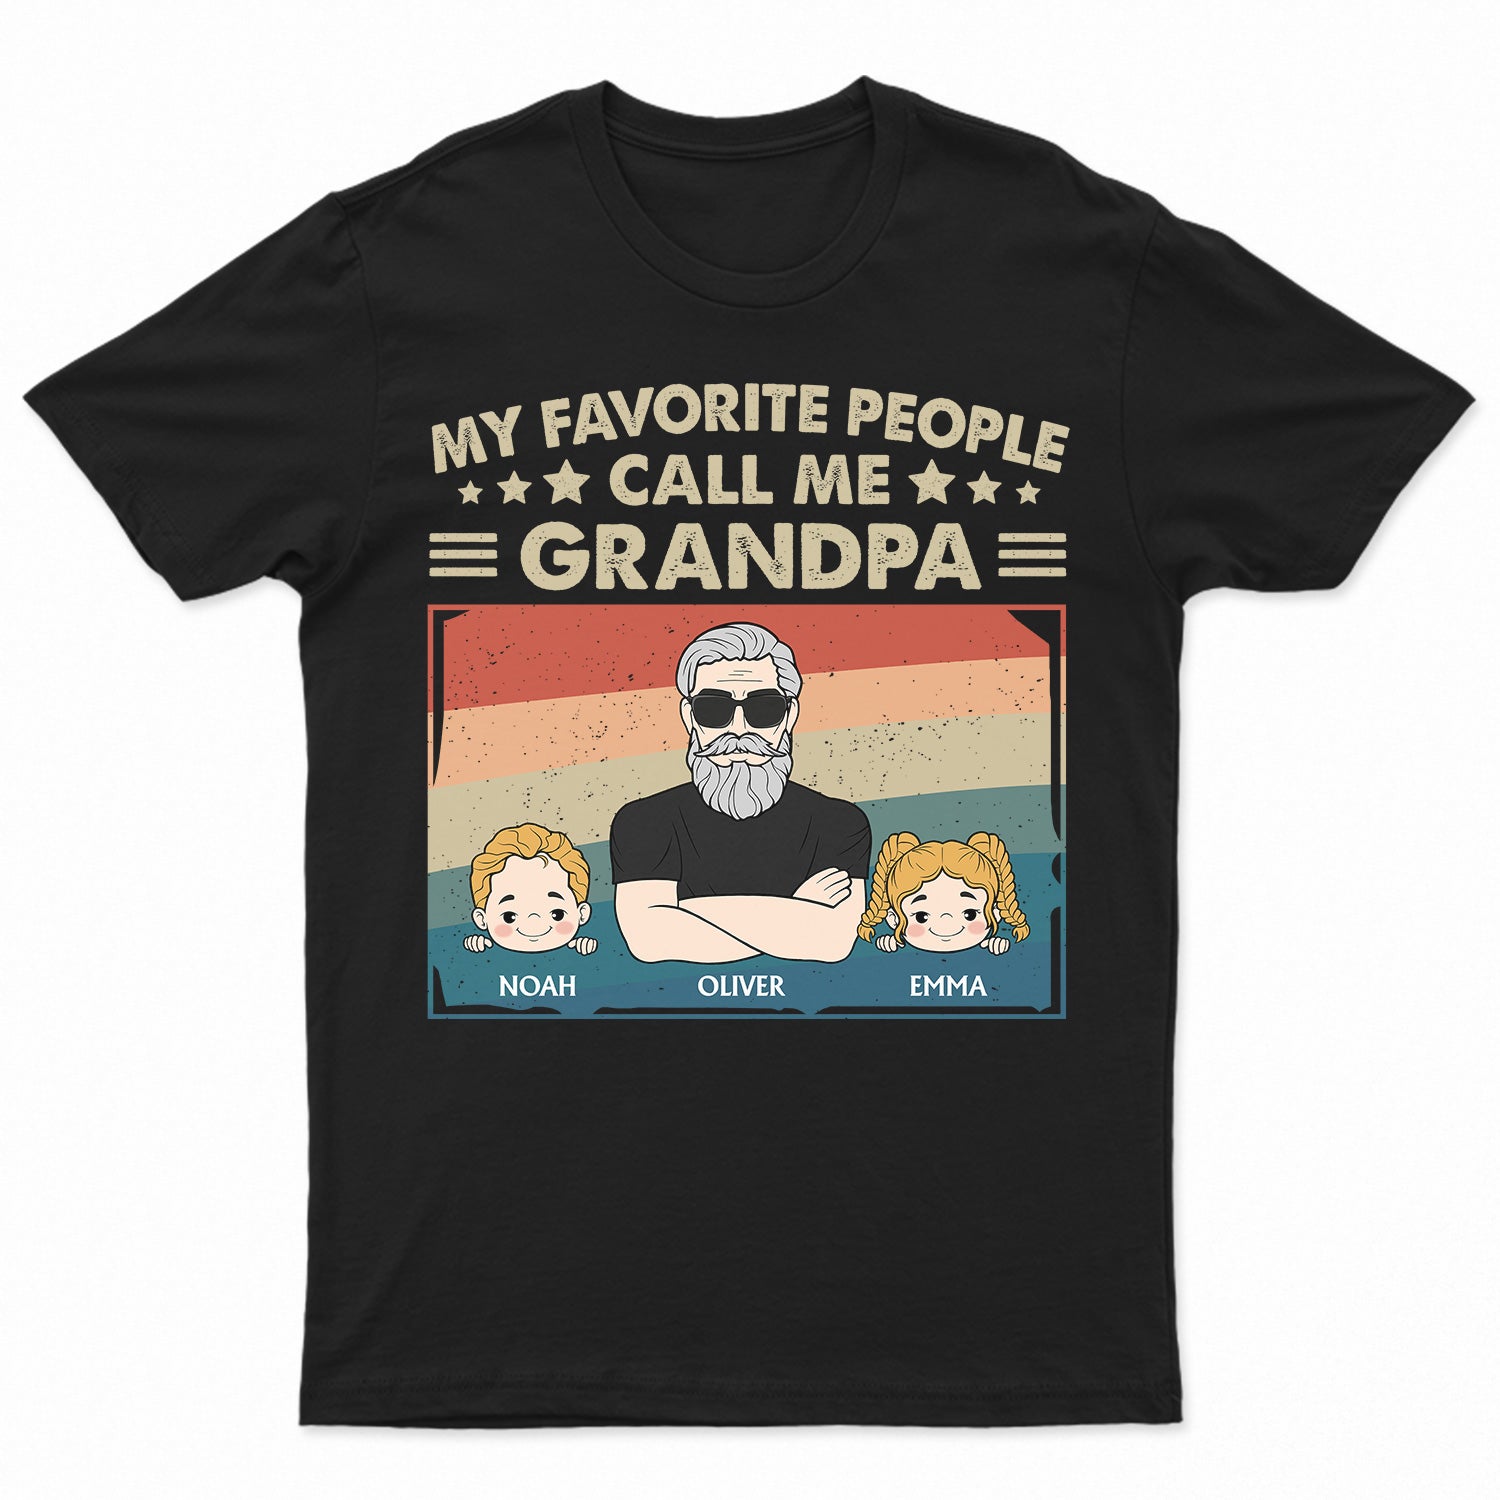 My Favorite People Call Me Grandpa Cartoon Art - Funny Gift For Grandfather, Grandpa, Dad, Father - Personalized T Shirt